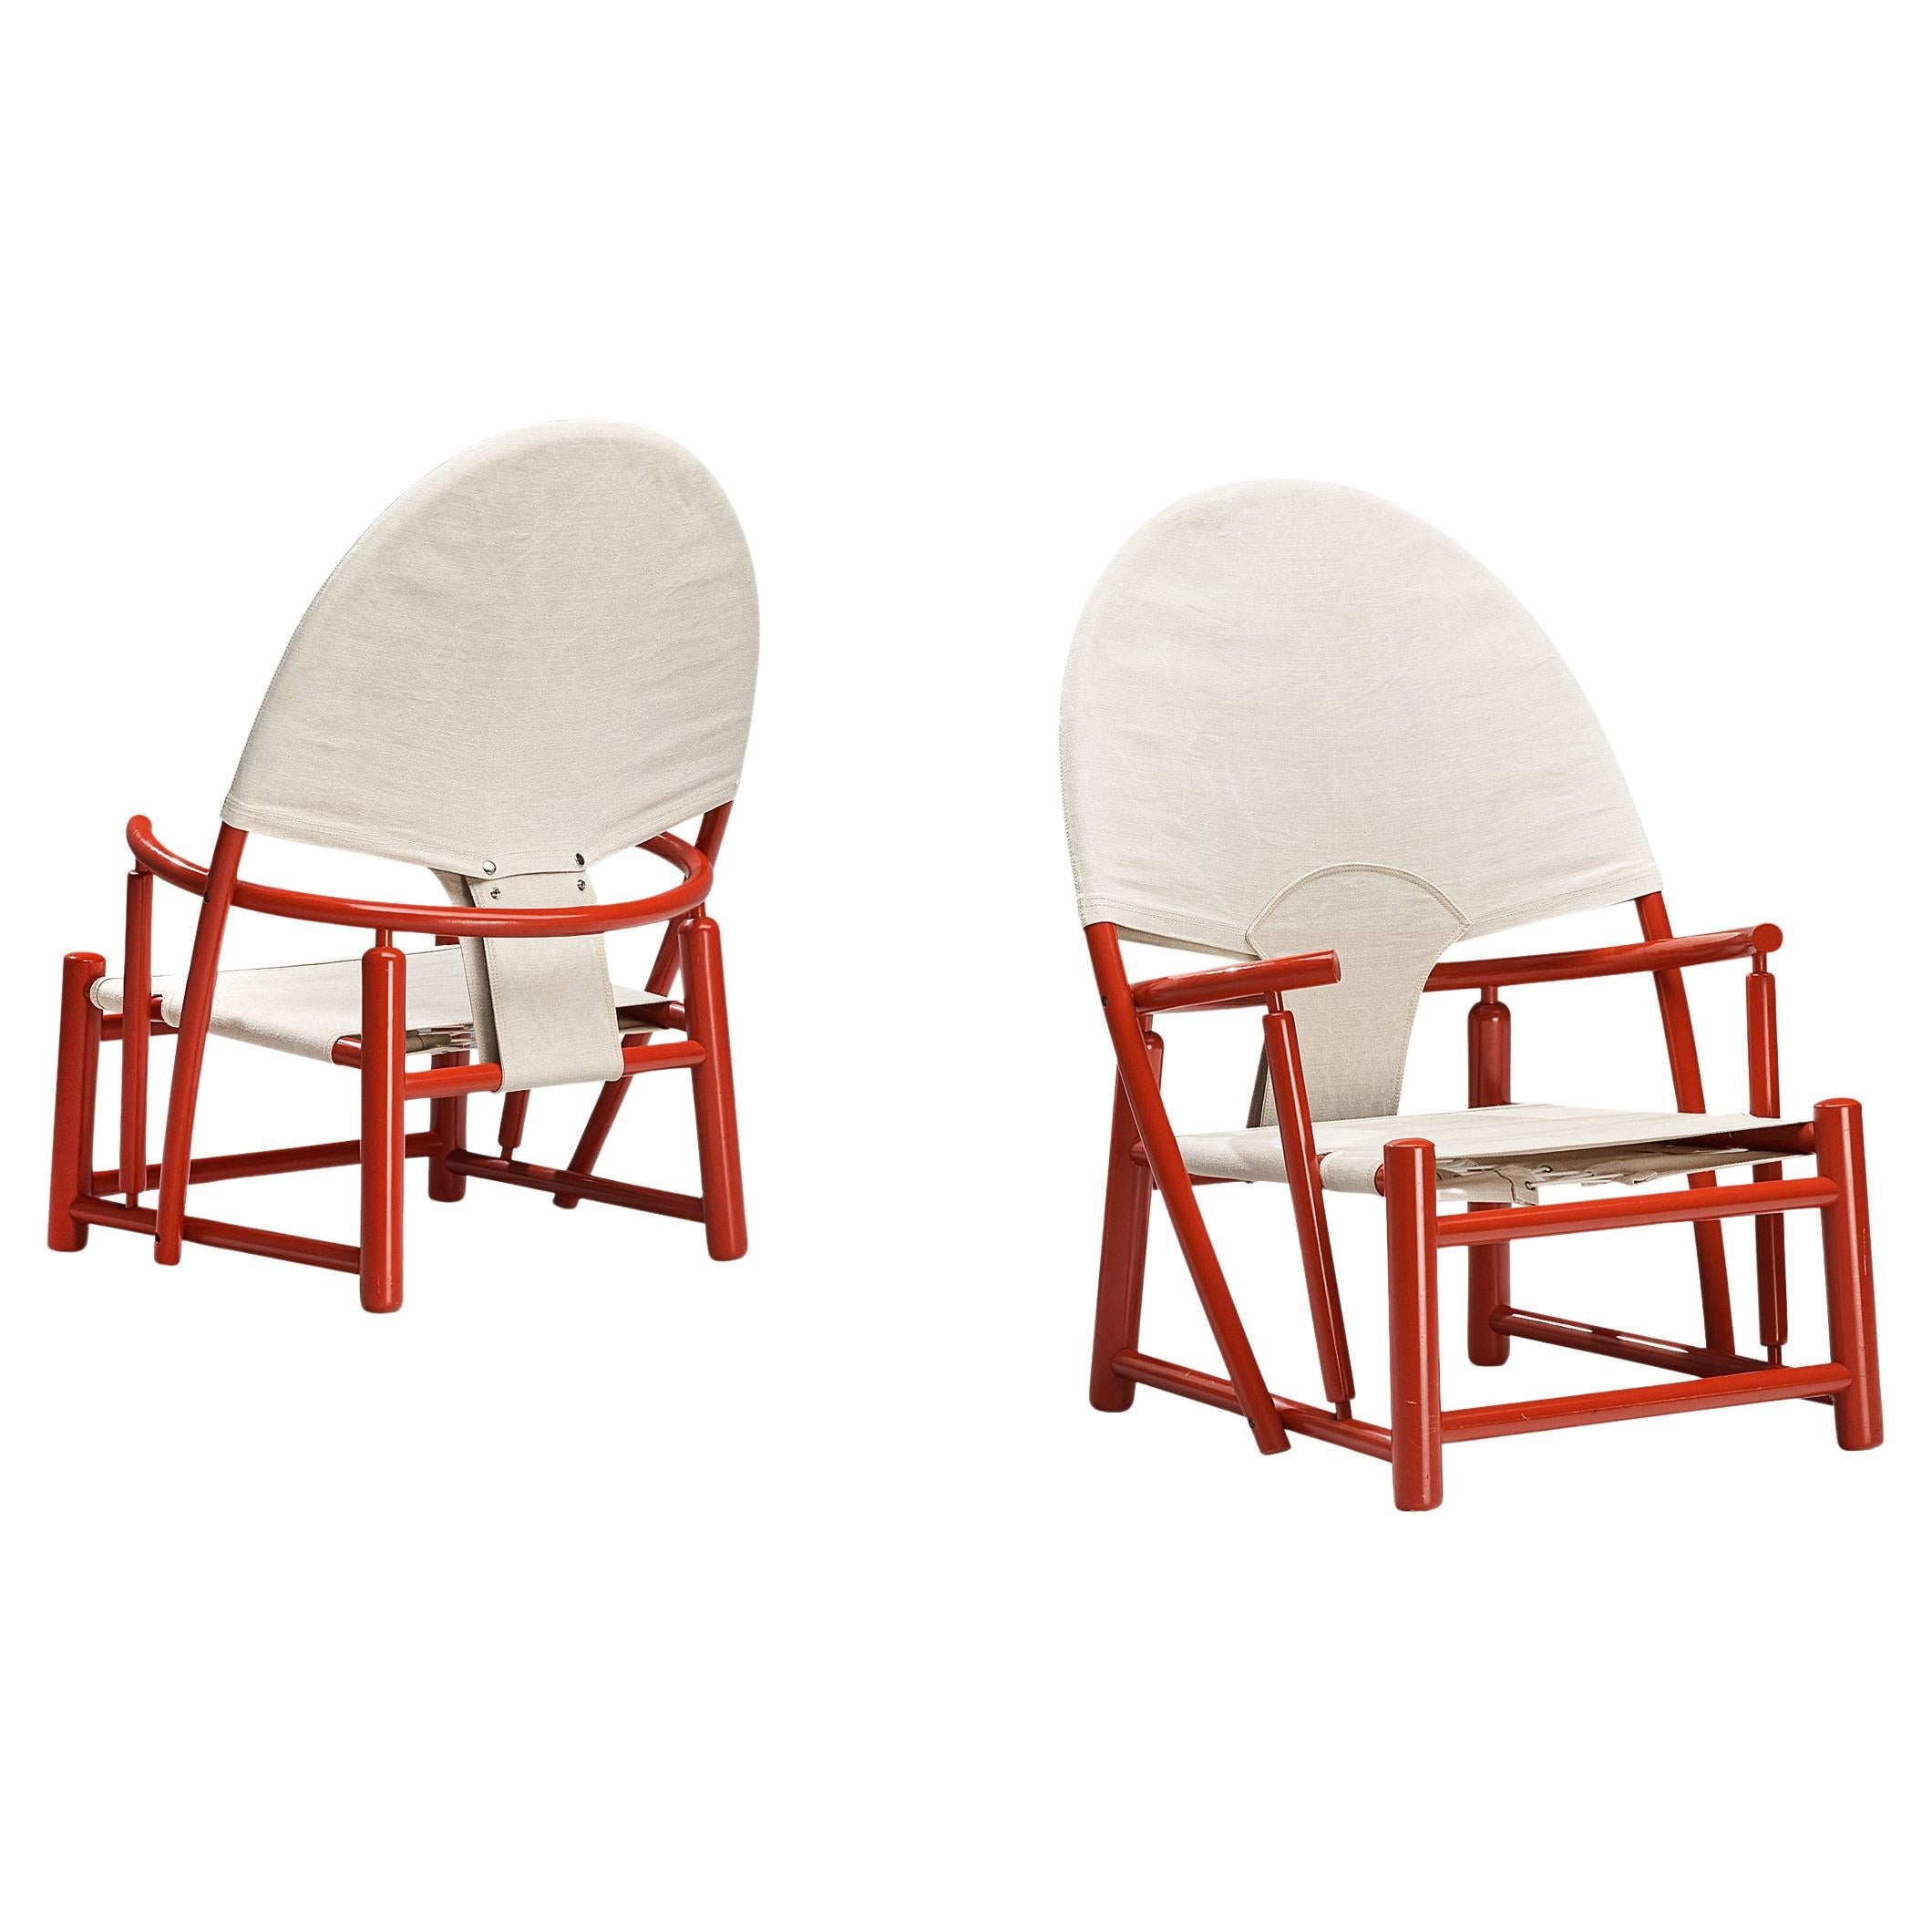 Werther Toffoloni & Piero Palange Pair of ‘Hoop’ Red Chairs in Canvas  For Sale